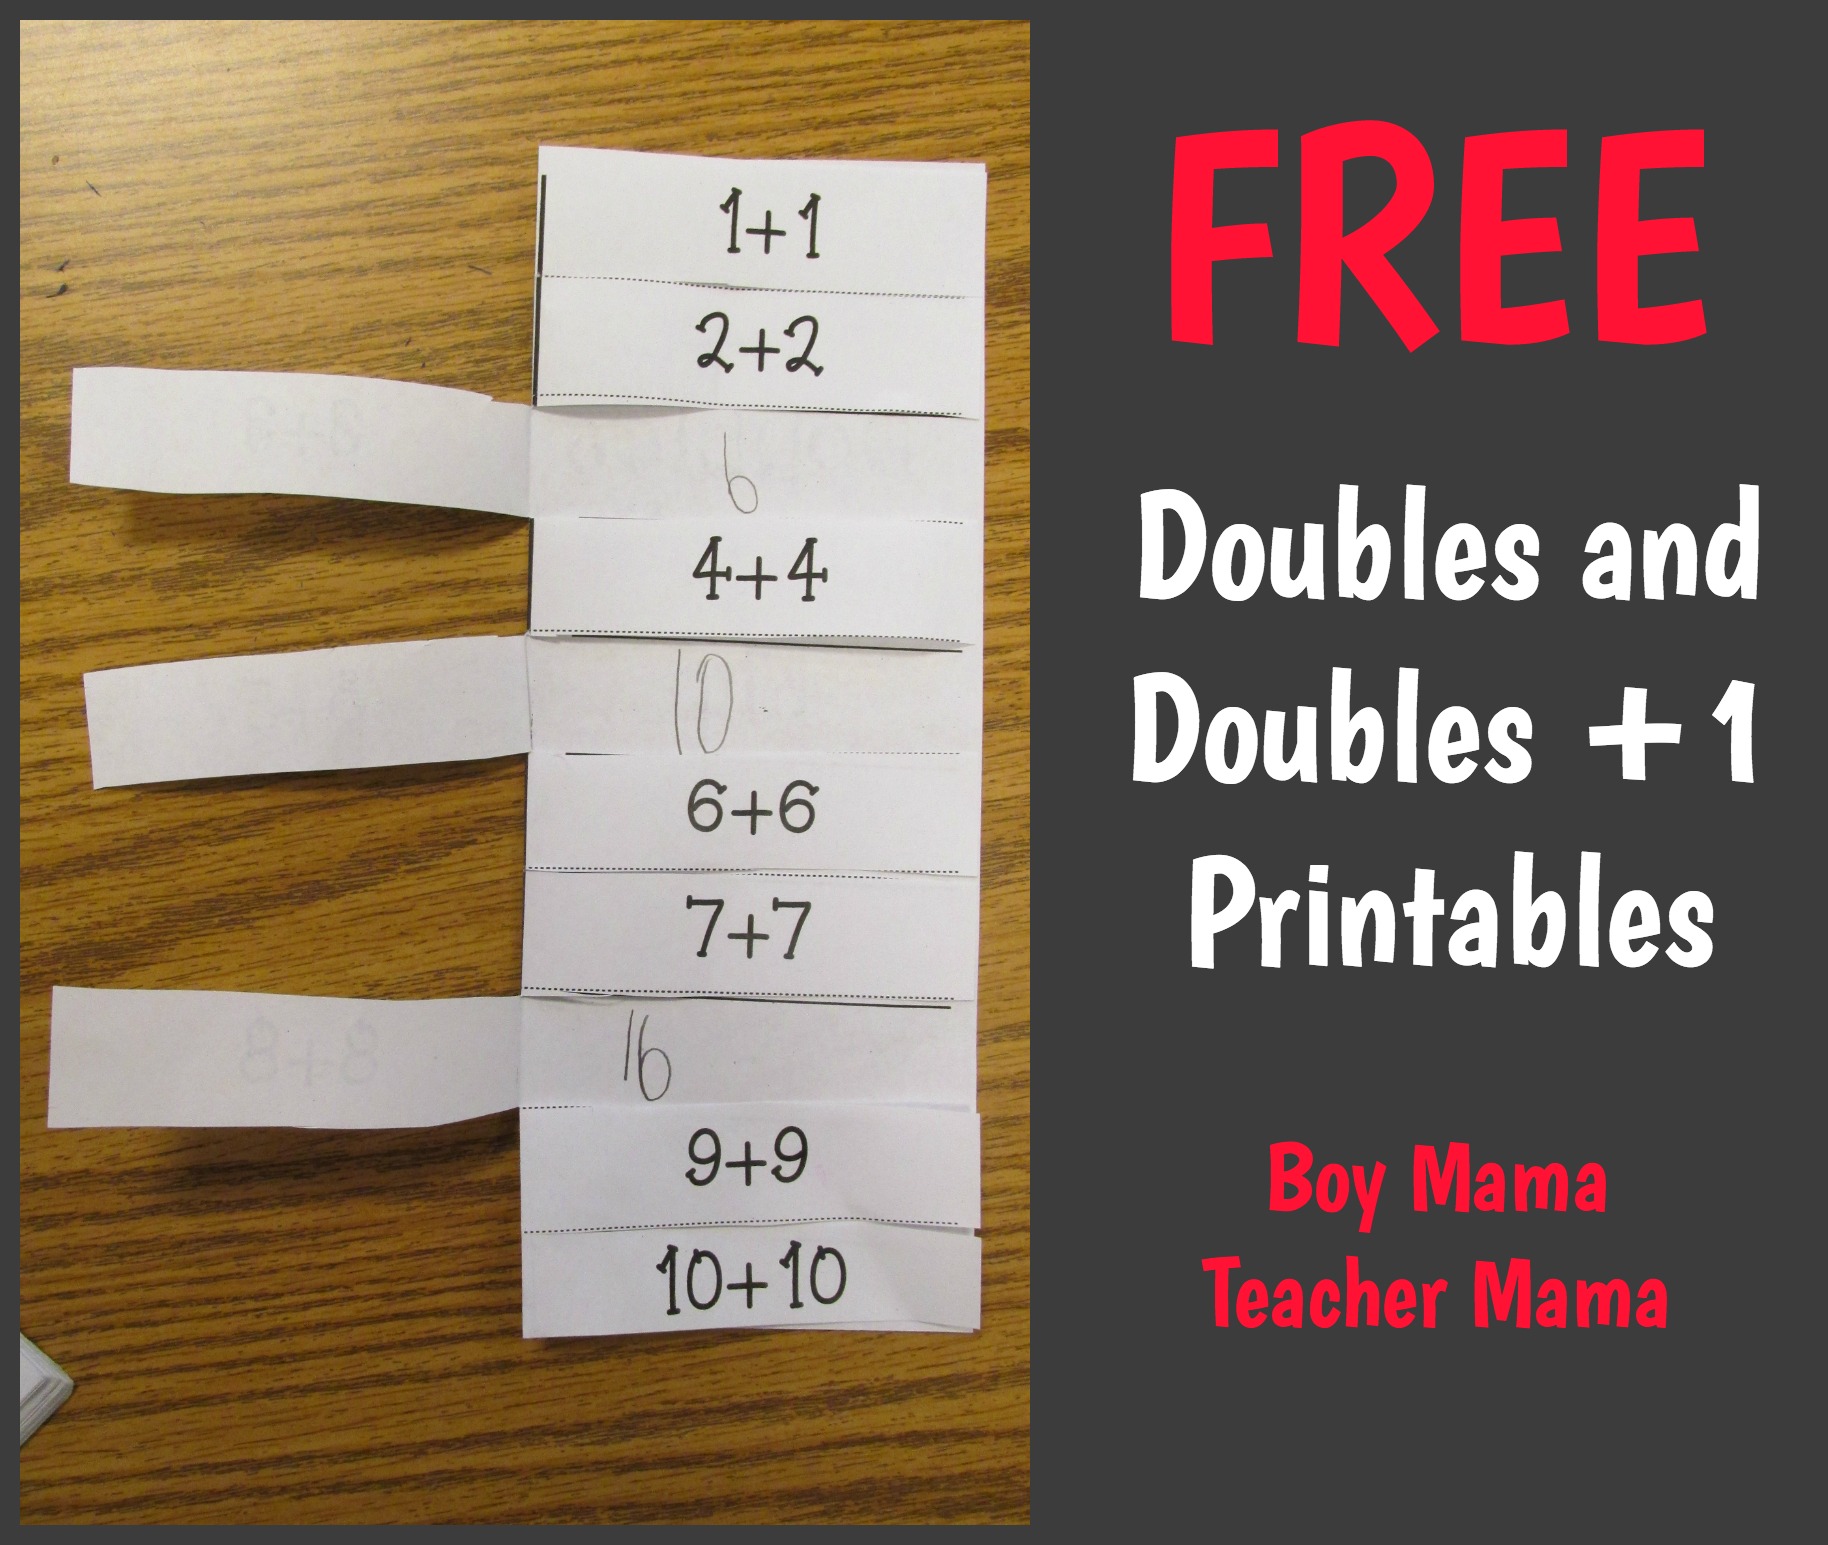 free-doubles-and-doubles-1-printables-boy-mama-teacher-mama